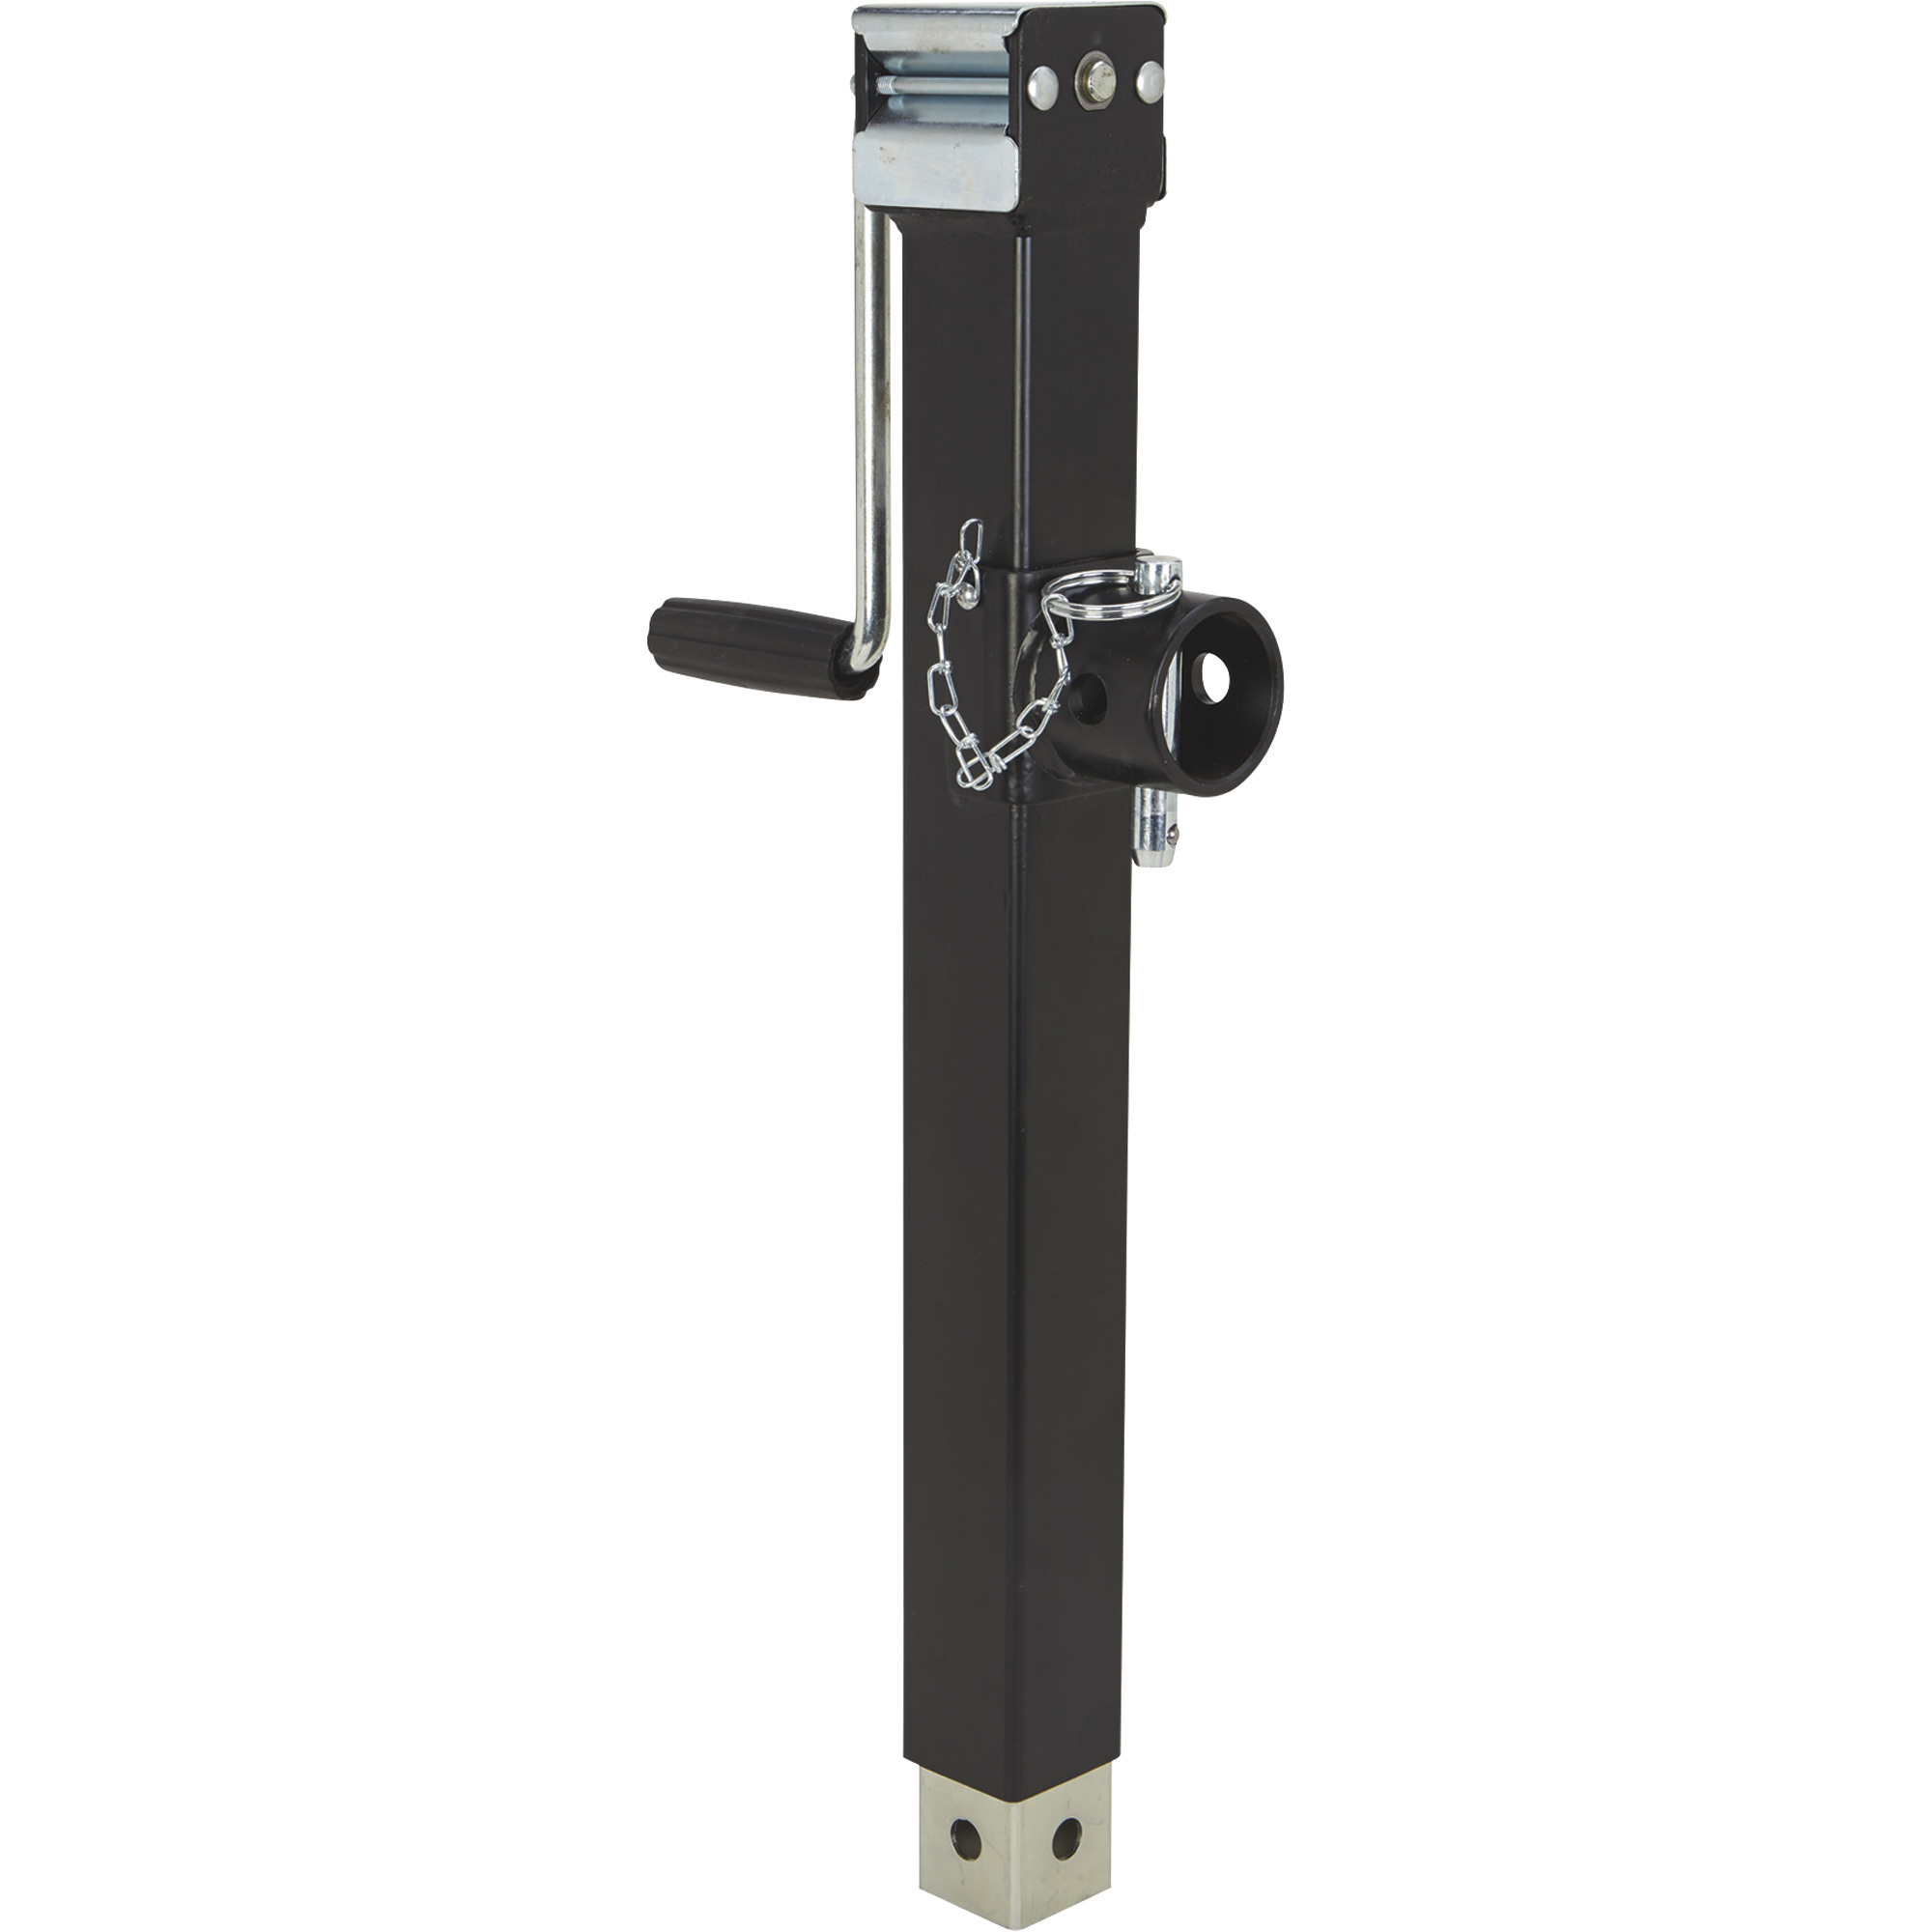 Ultra-Tow Sidewind Square Tube-Mount Jack, 3000-Lb. Lift Capacity